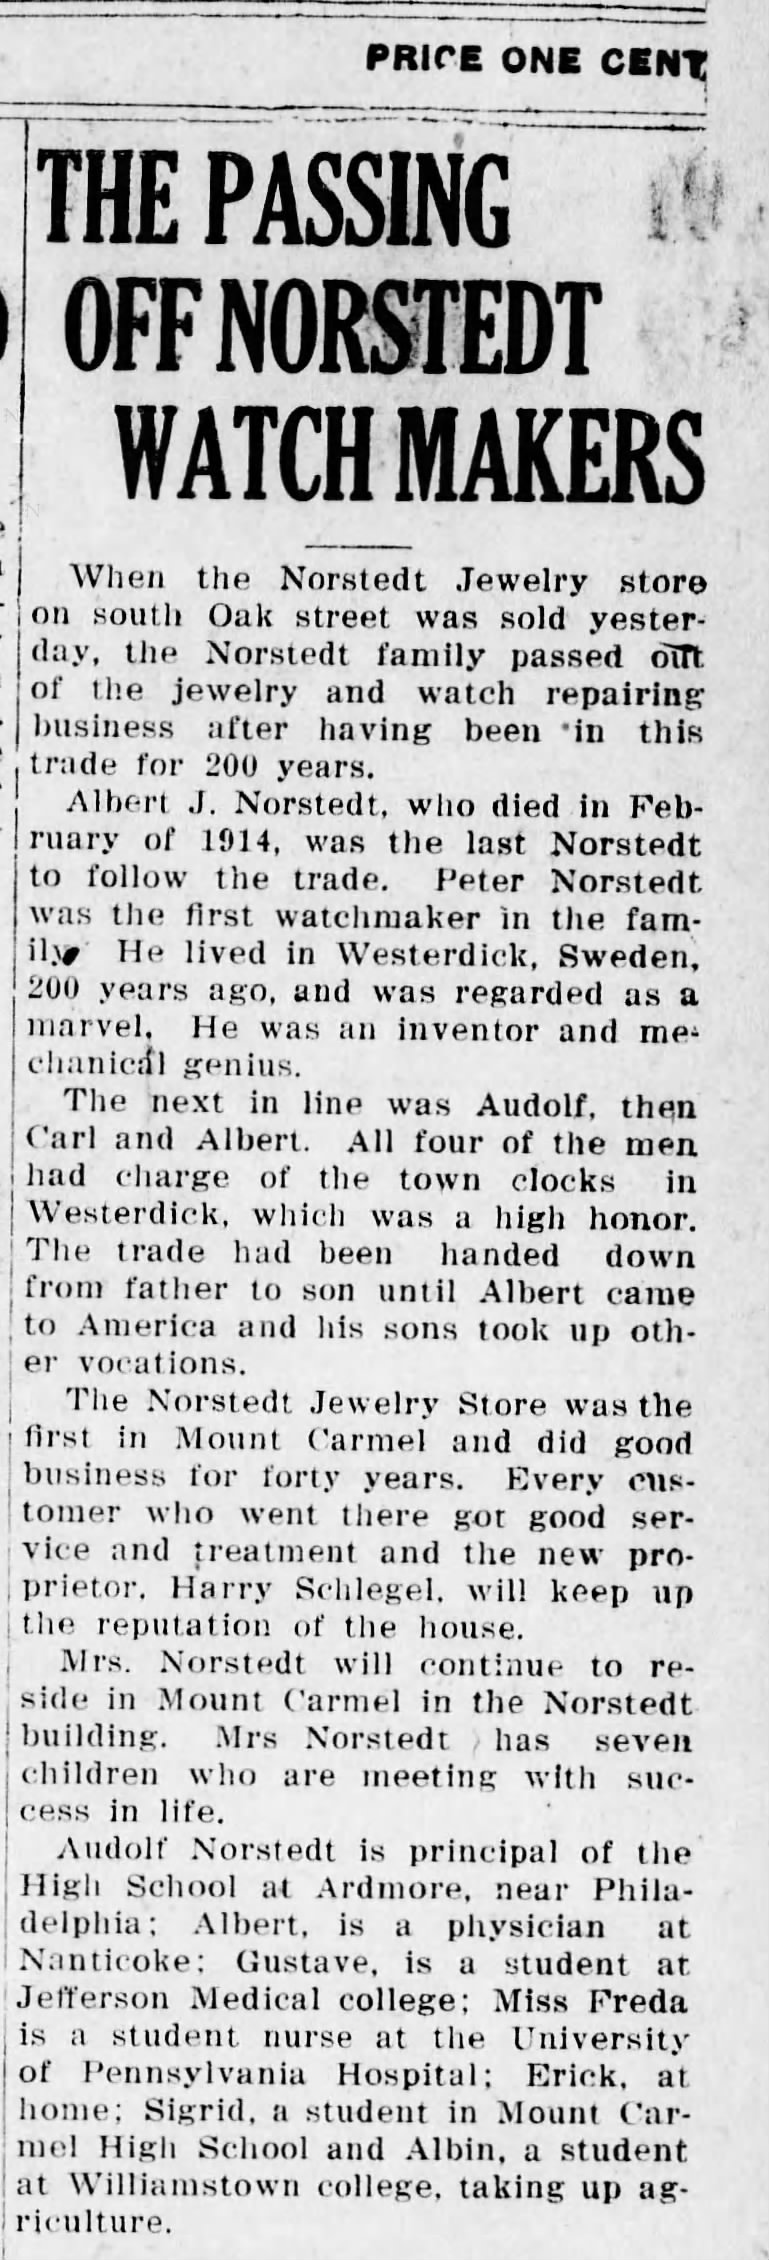 99 years ago! The passing of the Norstedt Jewelery Store